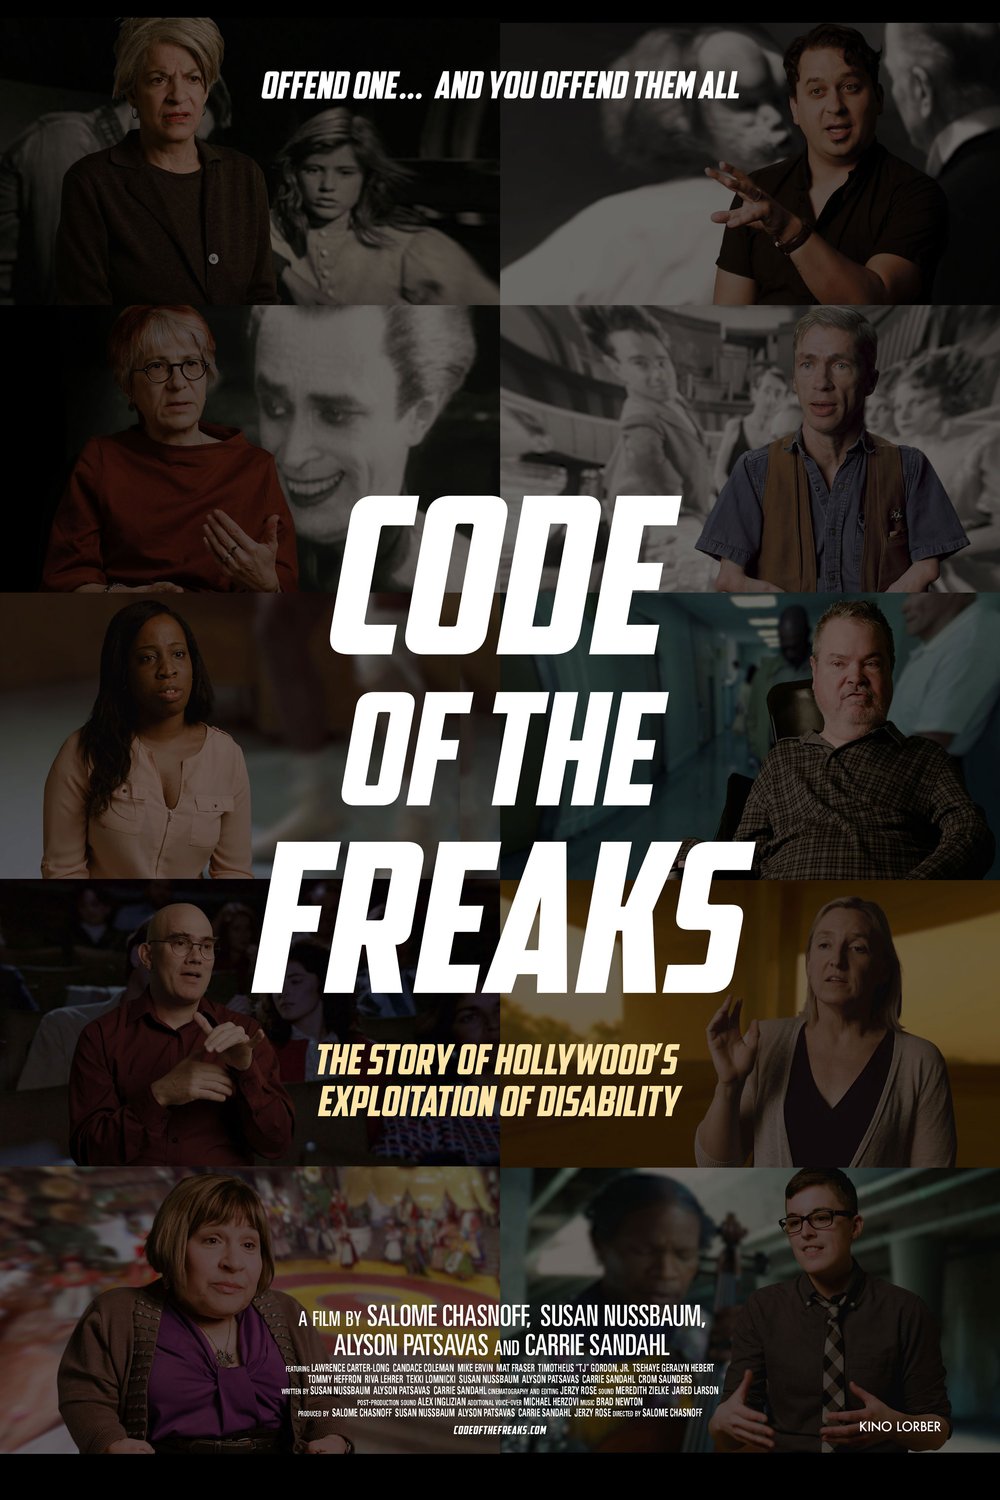 Poster of the movie Code of the Freaks